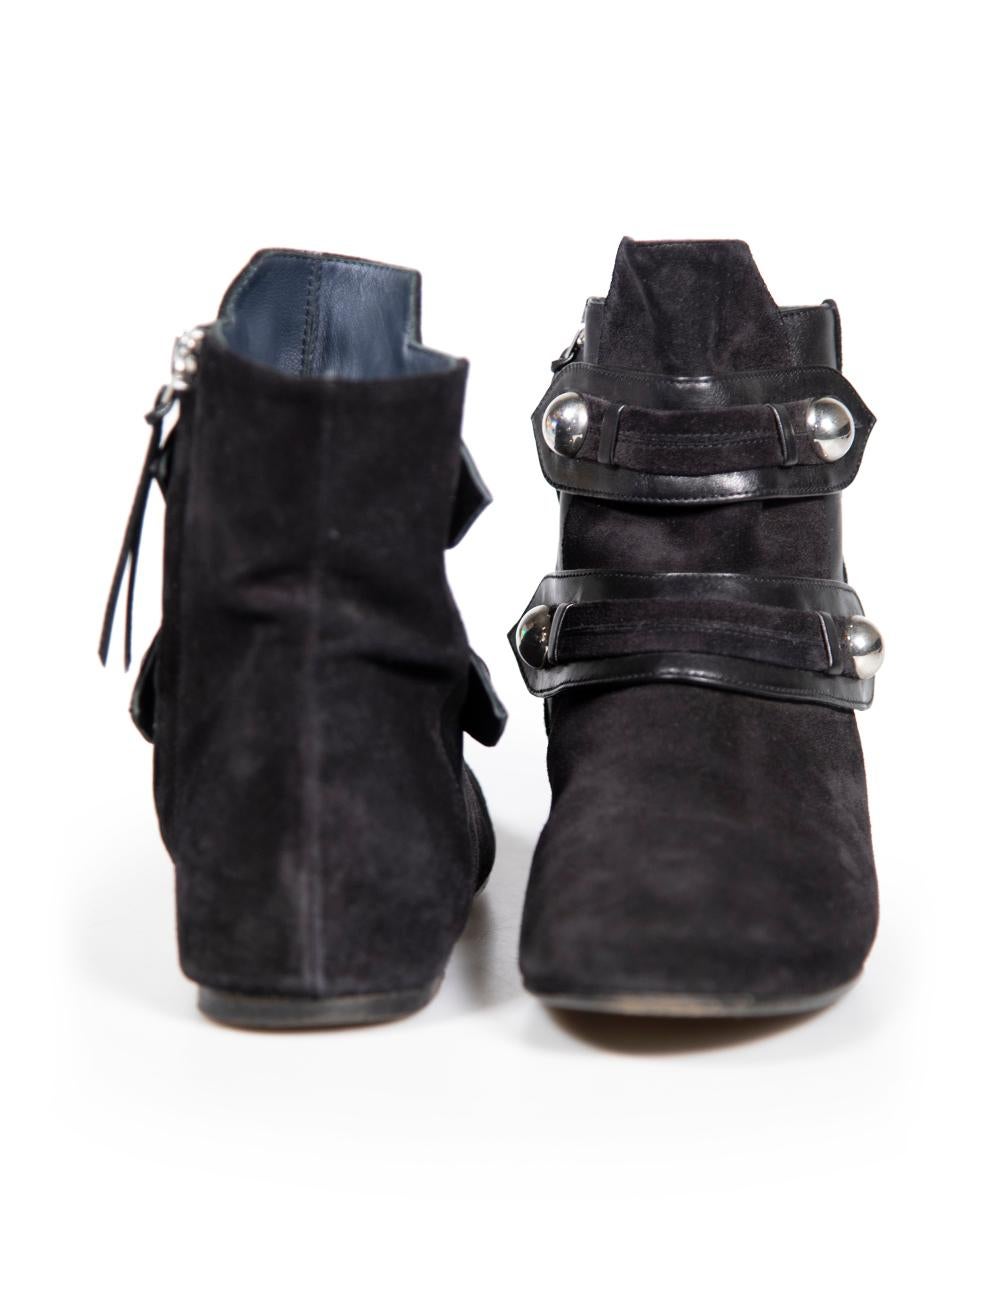 Isabel Marant Black Suede Ankle Riding Boots Size IT 37 In Good Condition For Sale In London, GB